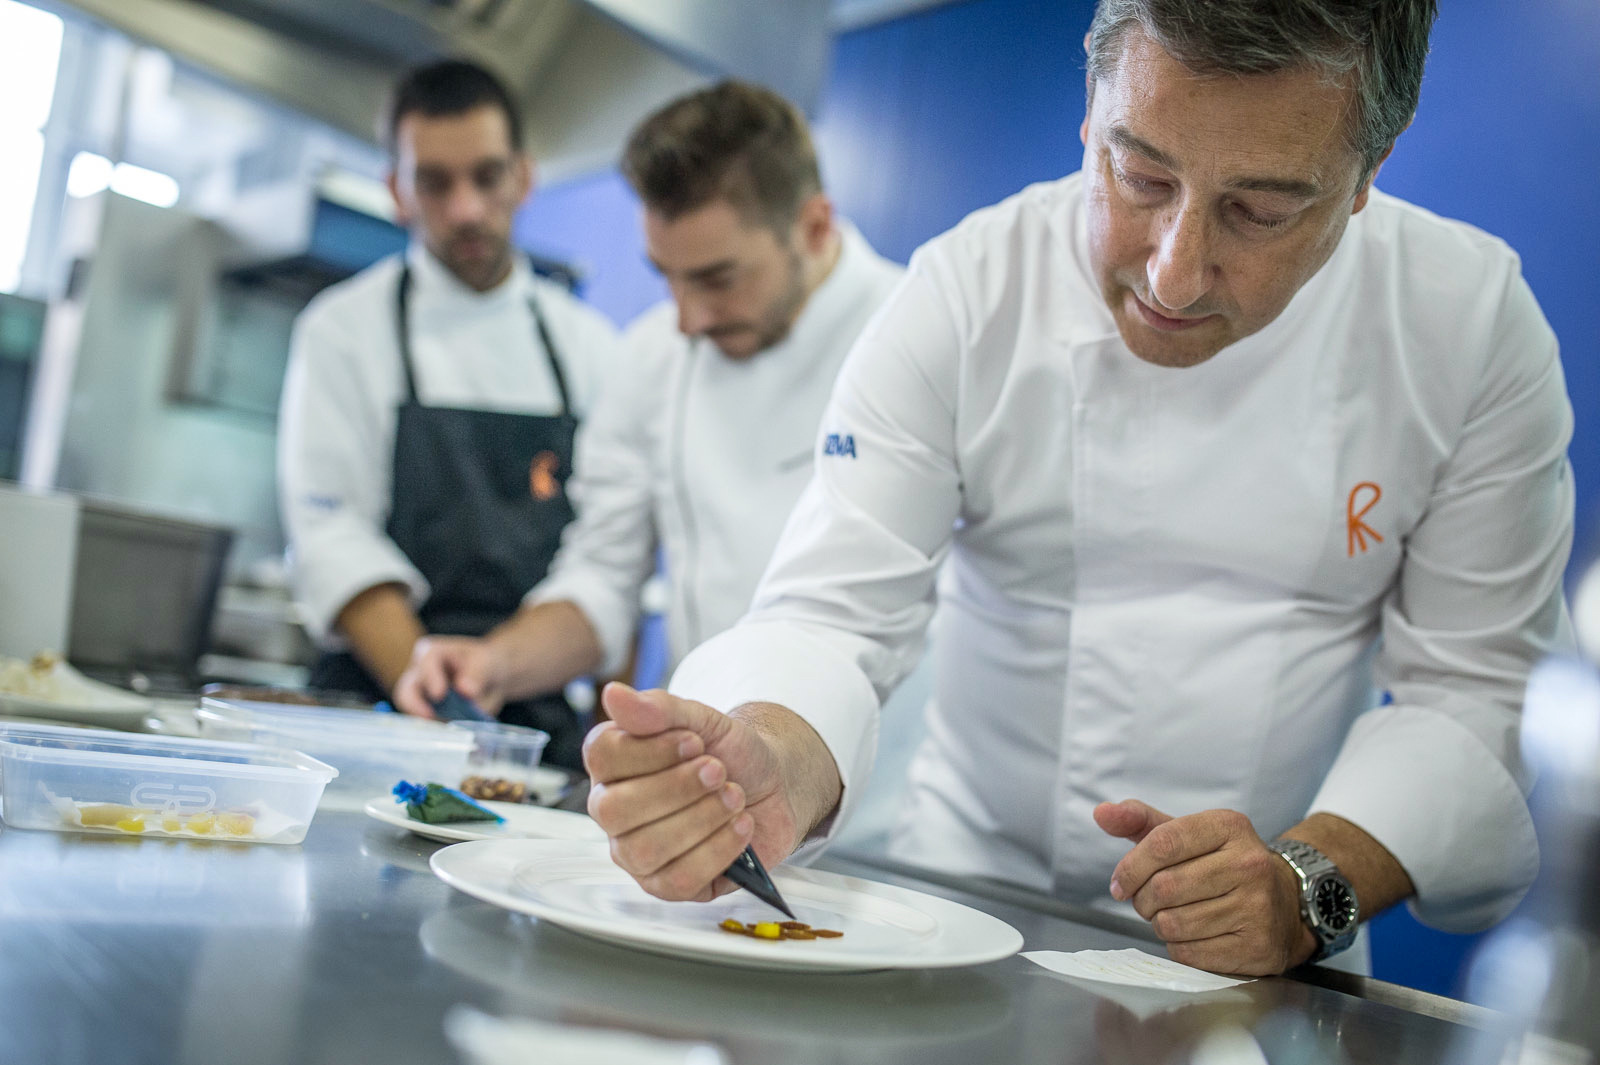 Joan Roca (foreground), head chef at El Celler de Can Roca, a top-rated restaurant in northeast Spain. Here Roca conducts a cooking demonstration at Westminster Kingsway College, in London.